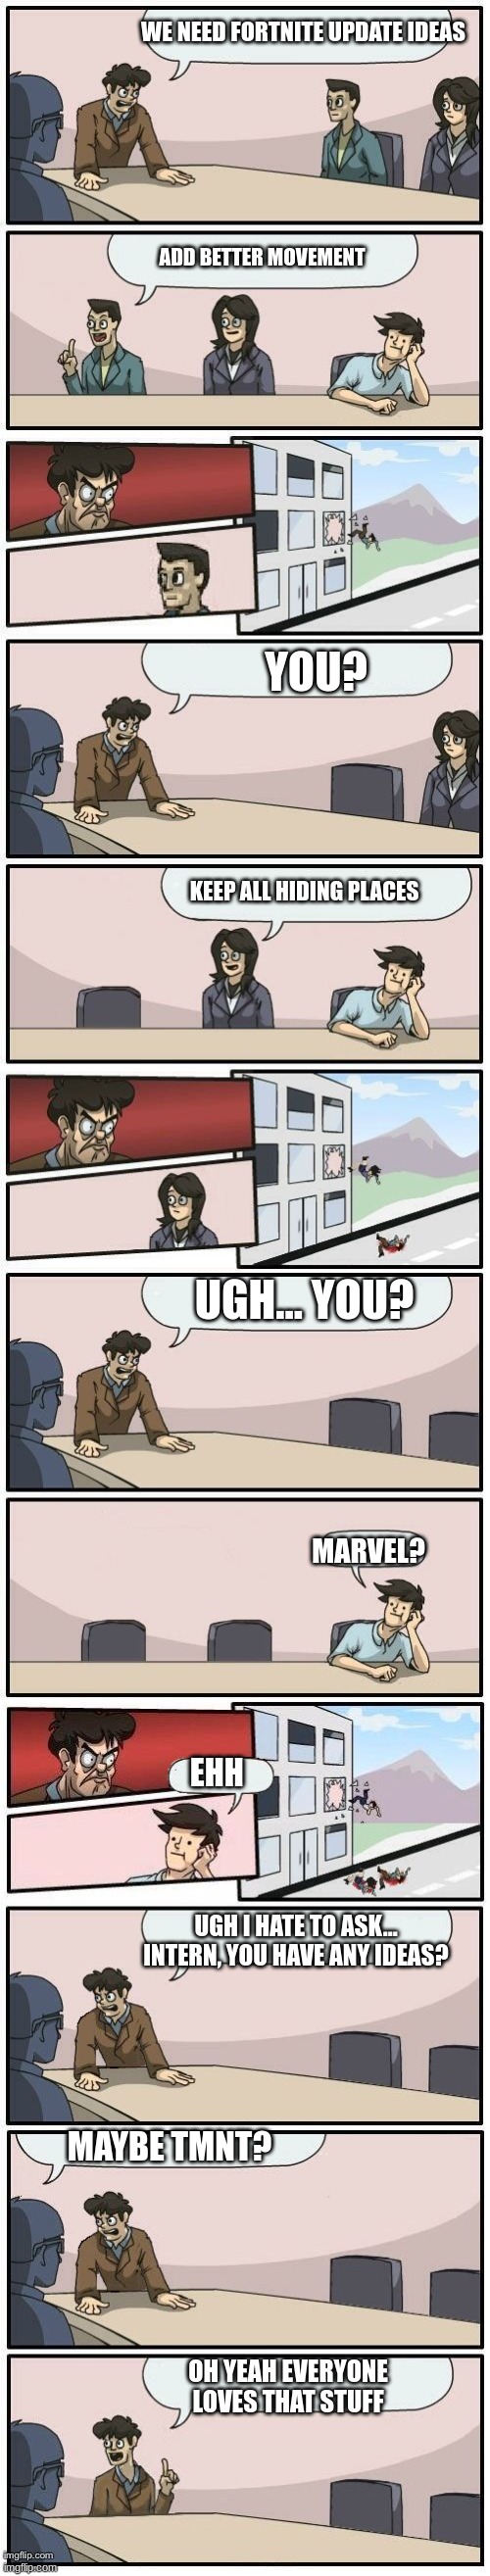 True | WE NEED FORTNITE UPDATE IDEAS; ADD BETTER MOVEMENT; YOU? KEEP ALL HIDING PLACES; UGH... YOU? MARVEL? EHH; UGH I HATE TO ASK... INTERN, YOU HAVE ANY IDEAS? MAYBE TMNT? OH YEAH EVERYONE LOVES THAT STUFF | image tagged in boardroom meeting suggestions extended,tmnt,fortnite | made w/ Imgflip meme maker